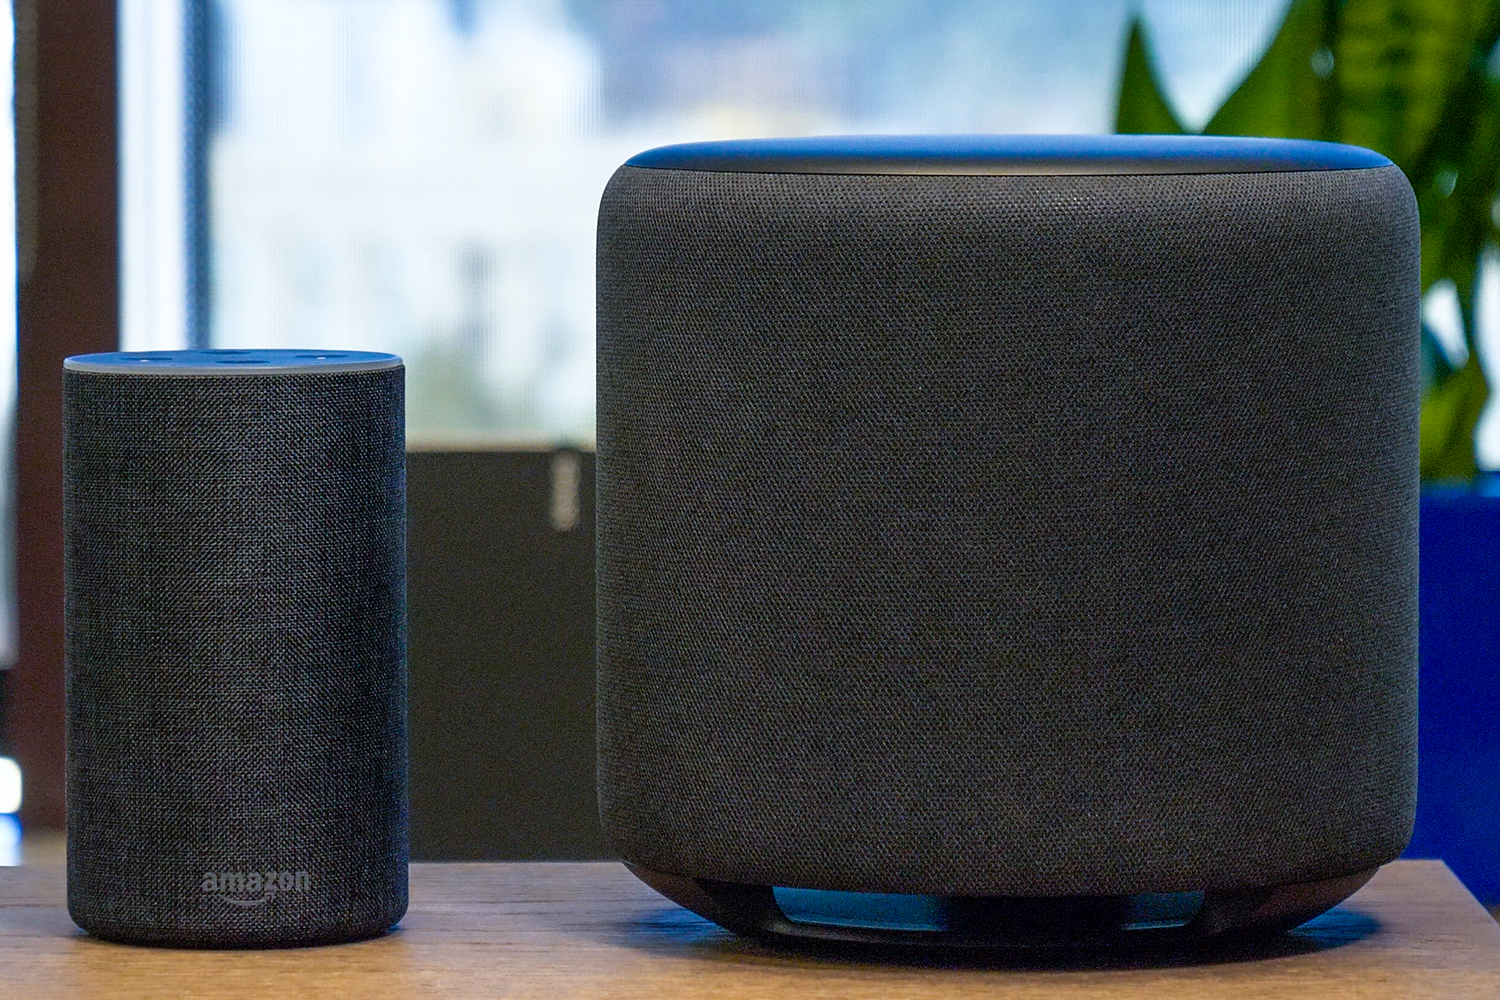 Echo Sub review: Exactly what you need for Alexa-powered